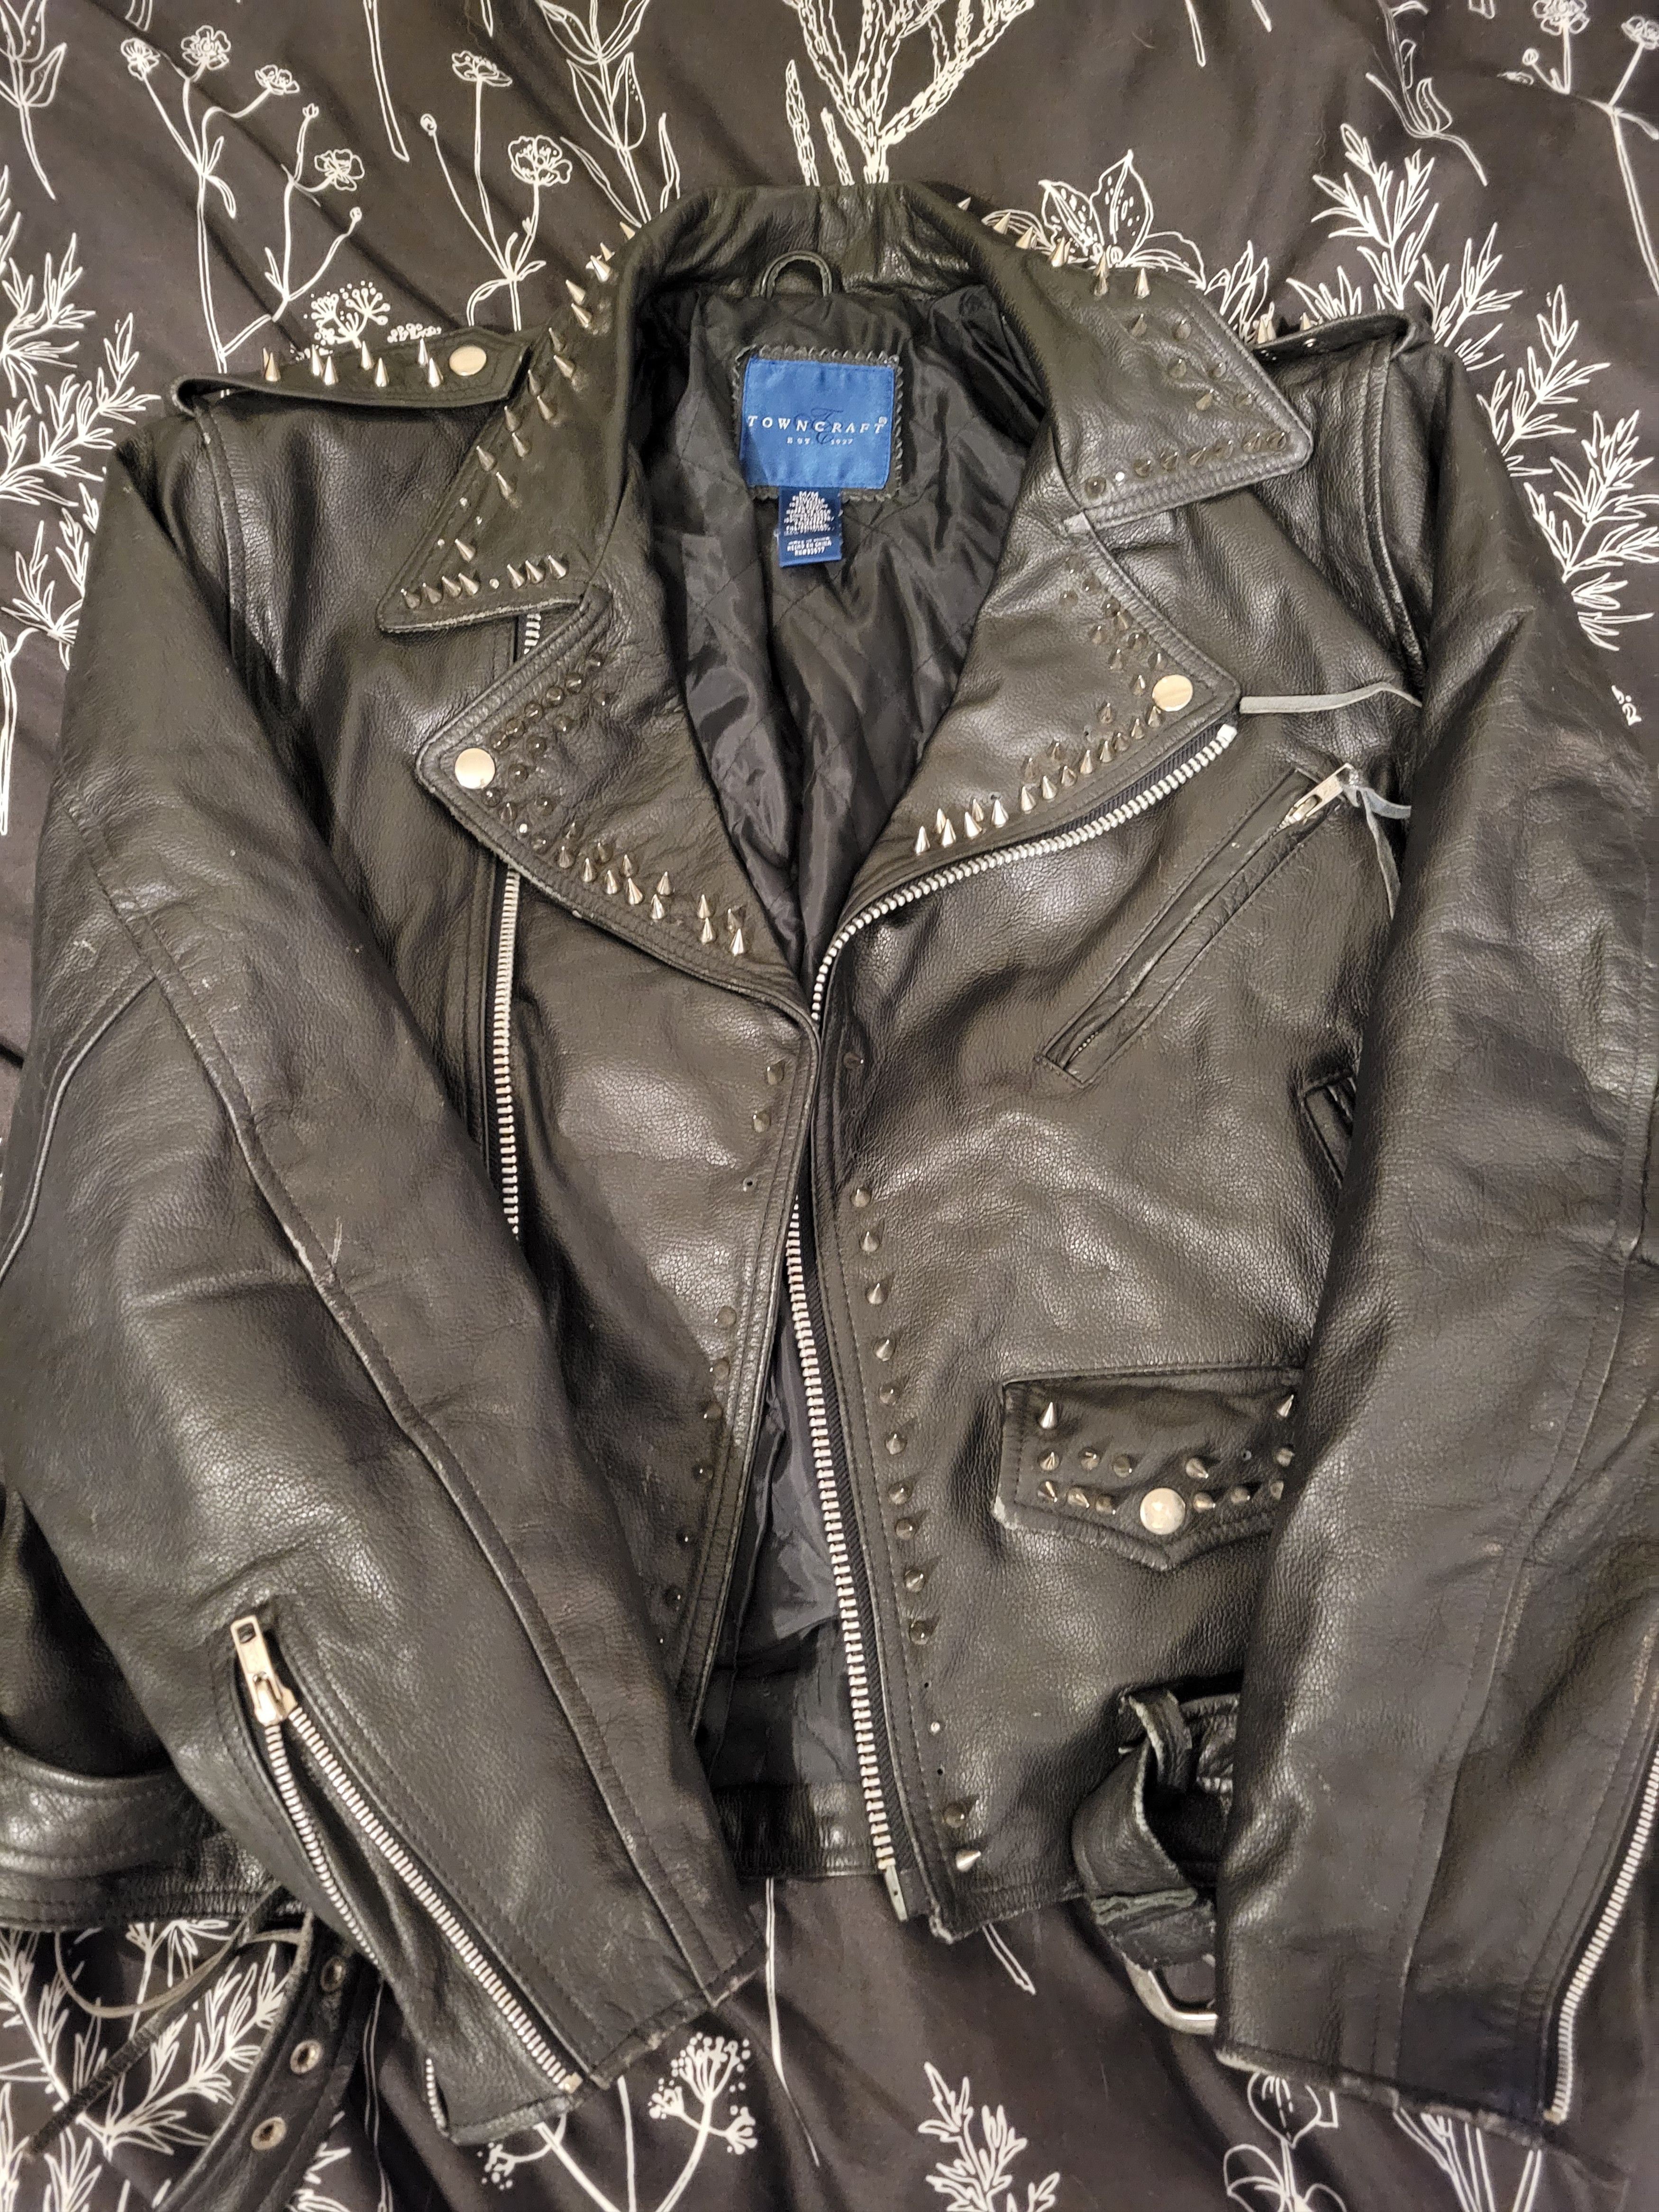 Towncraft Towncraft Custom Studded Leather motorcycle jacket | Grailed